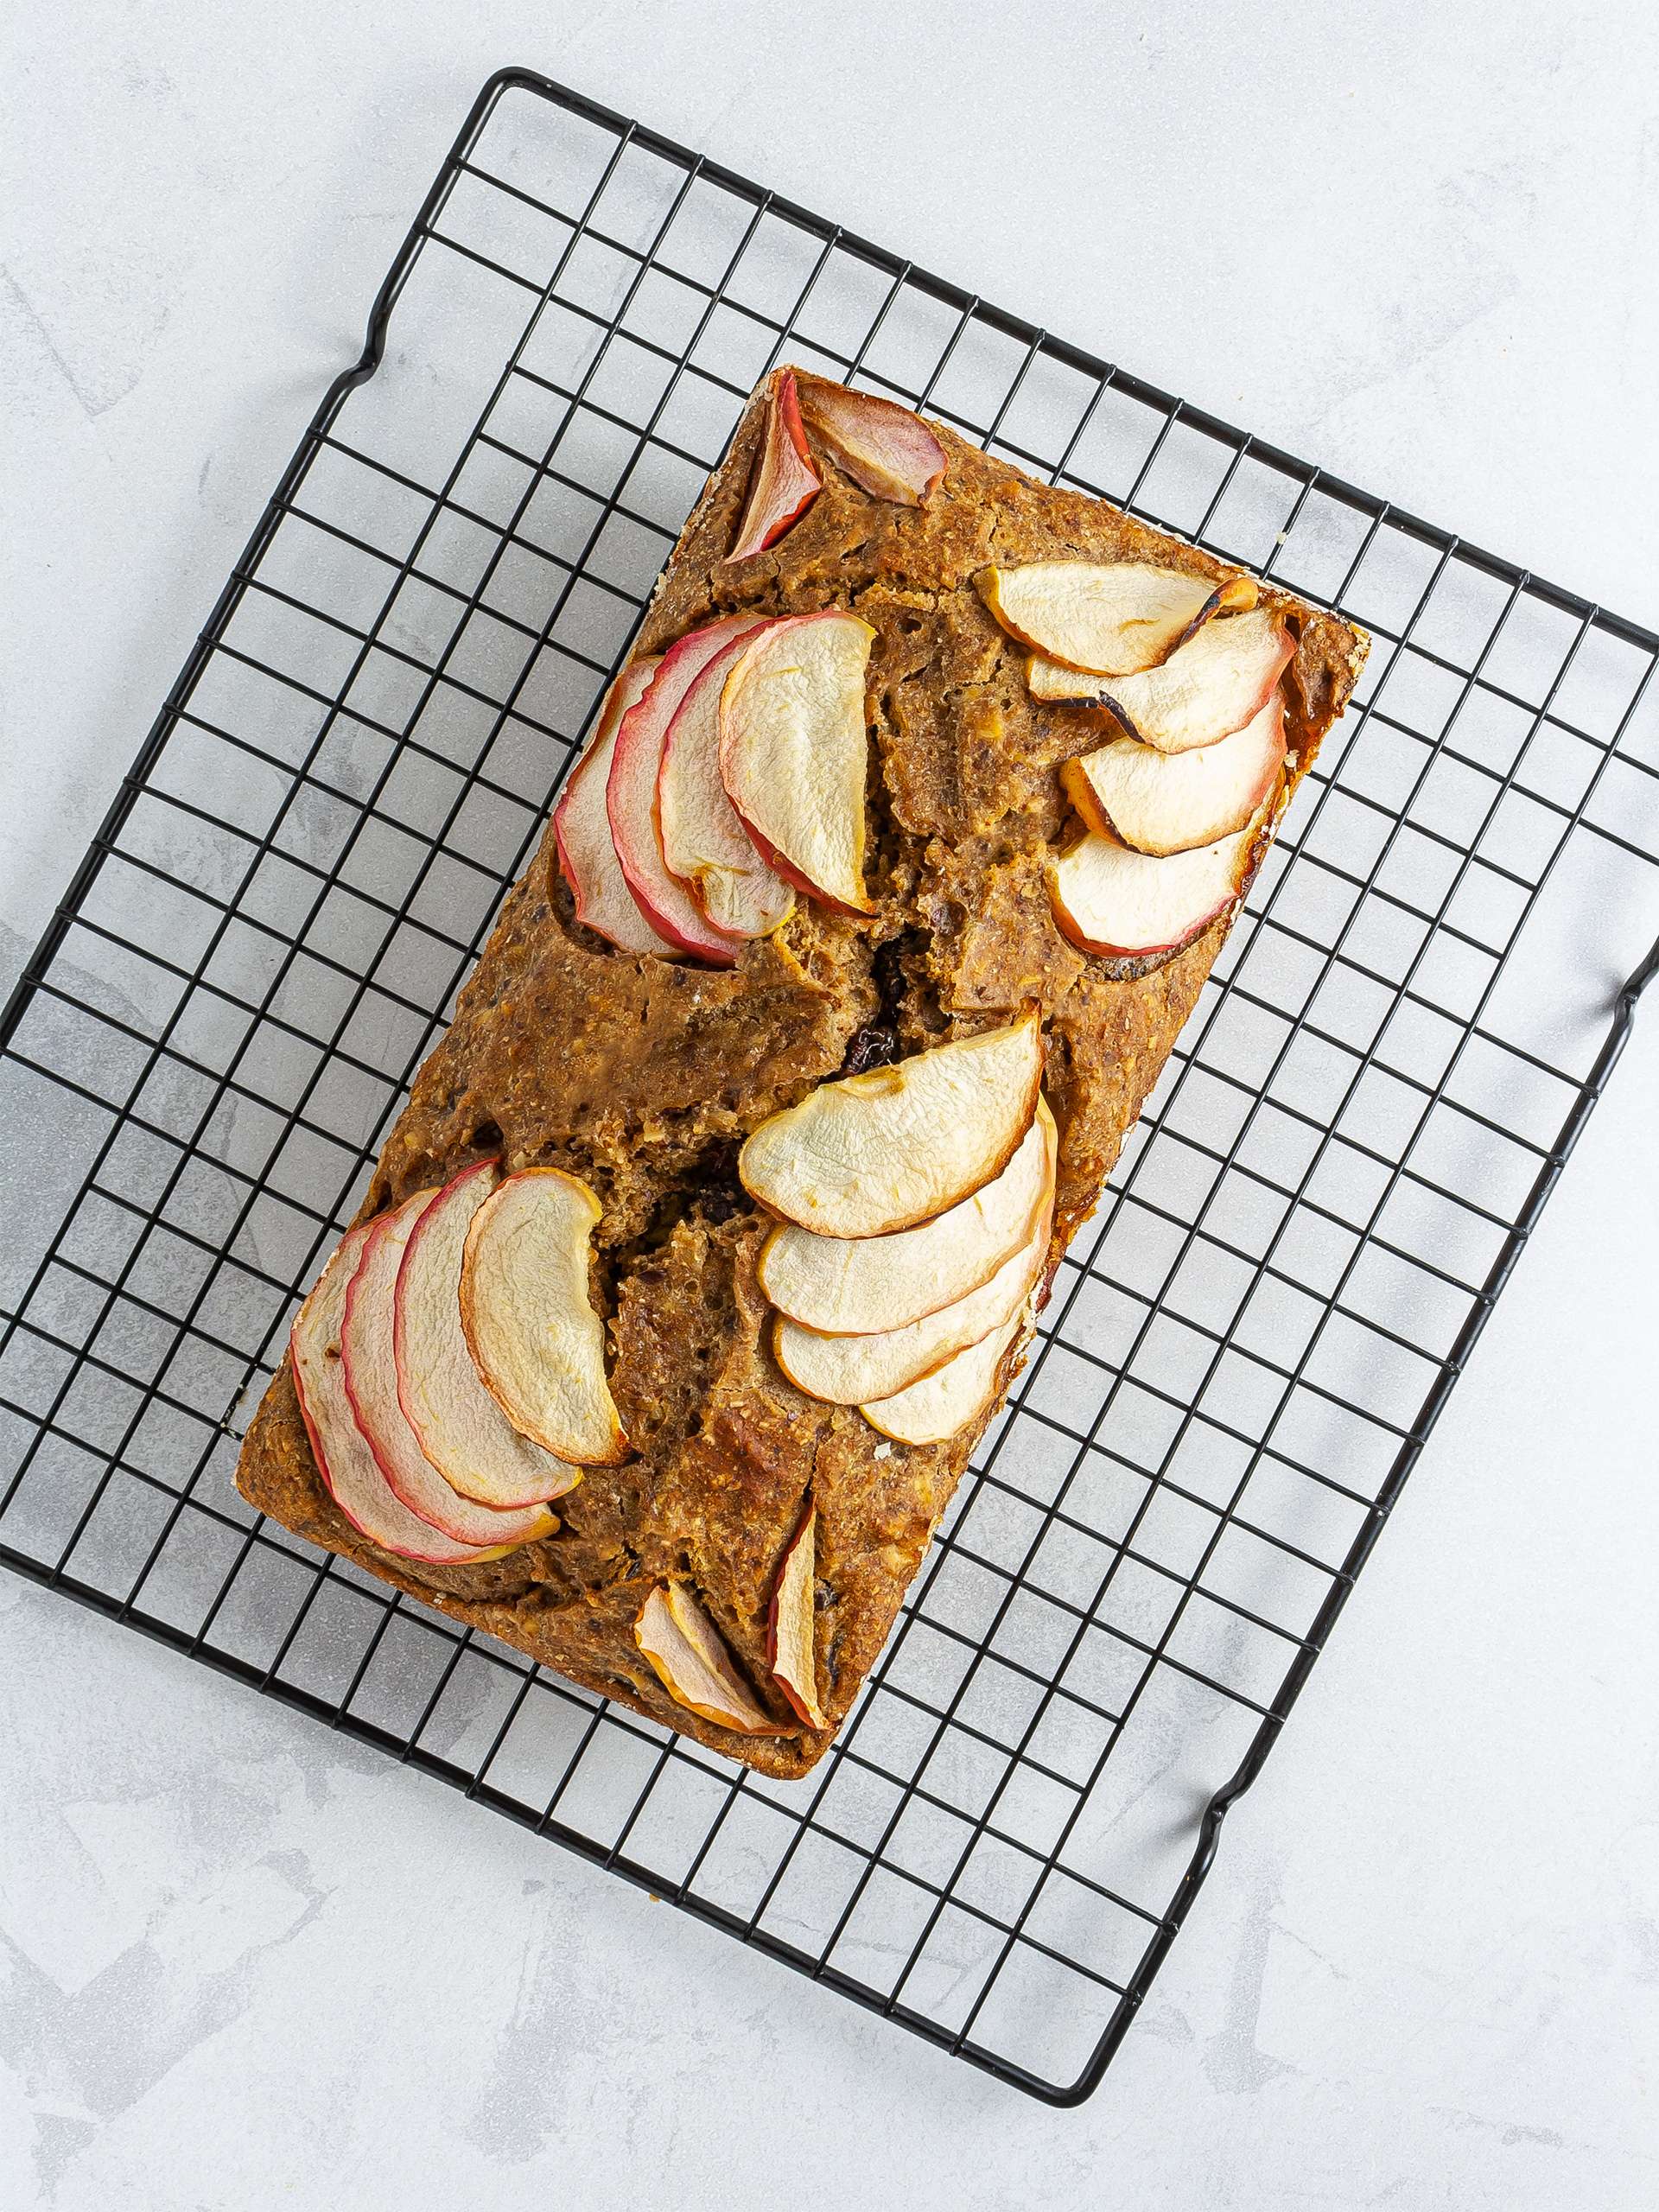 Baked apple cake bread on wire rack